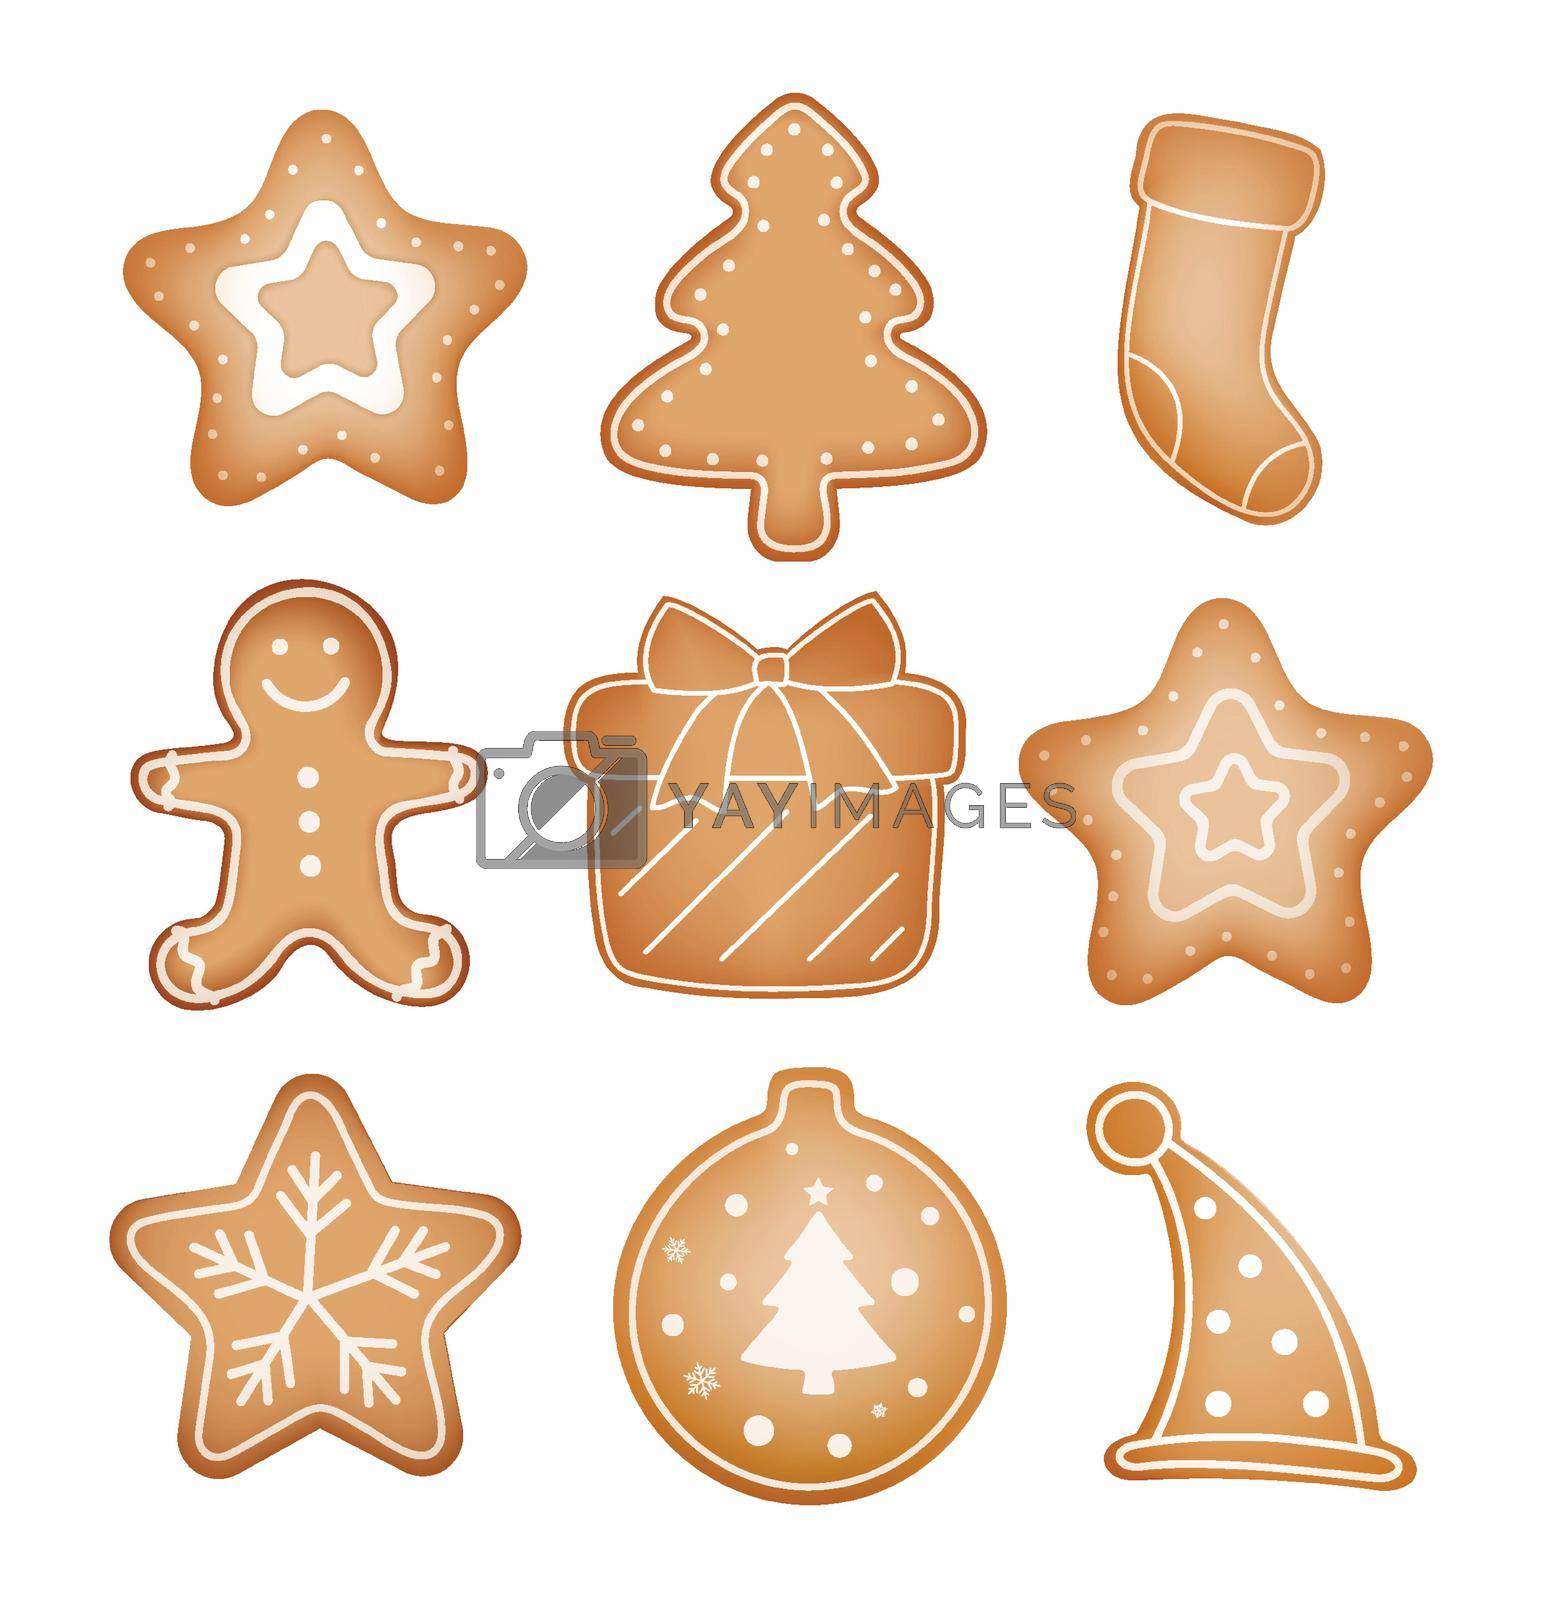 Royalty free image of Christmas gingerbread cookies set isolated on white background. by kaisorn